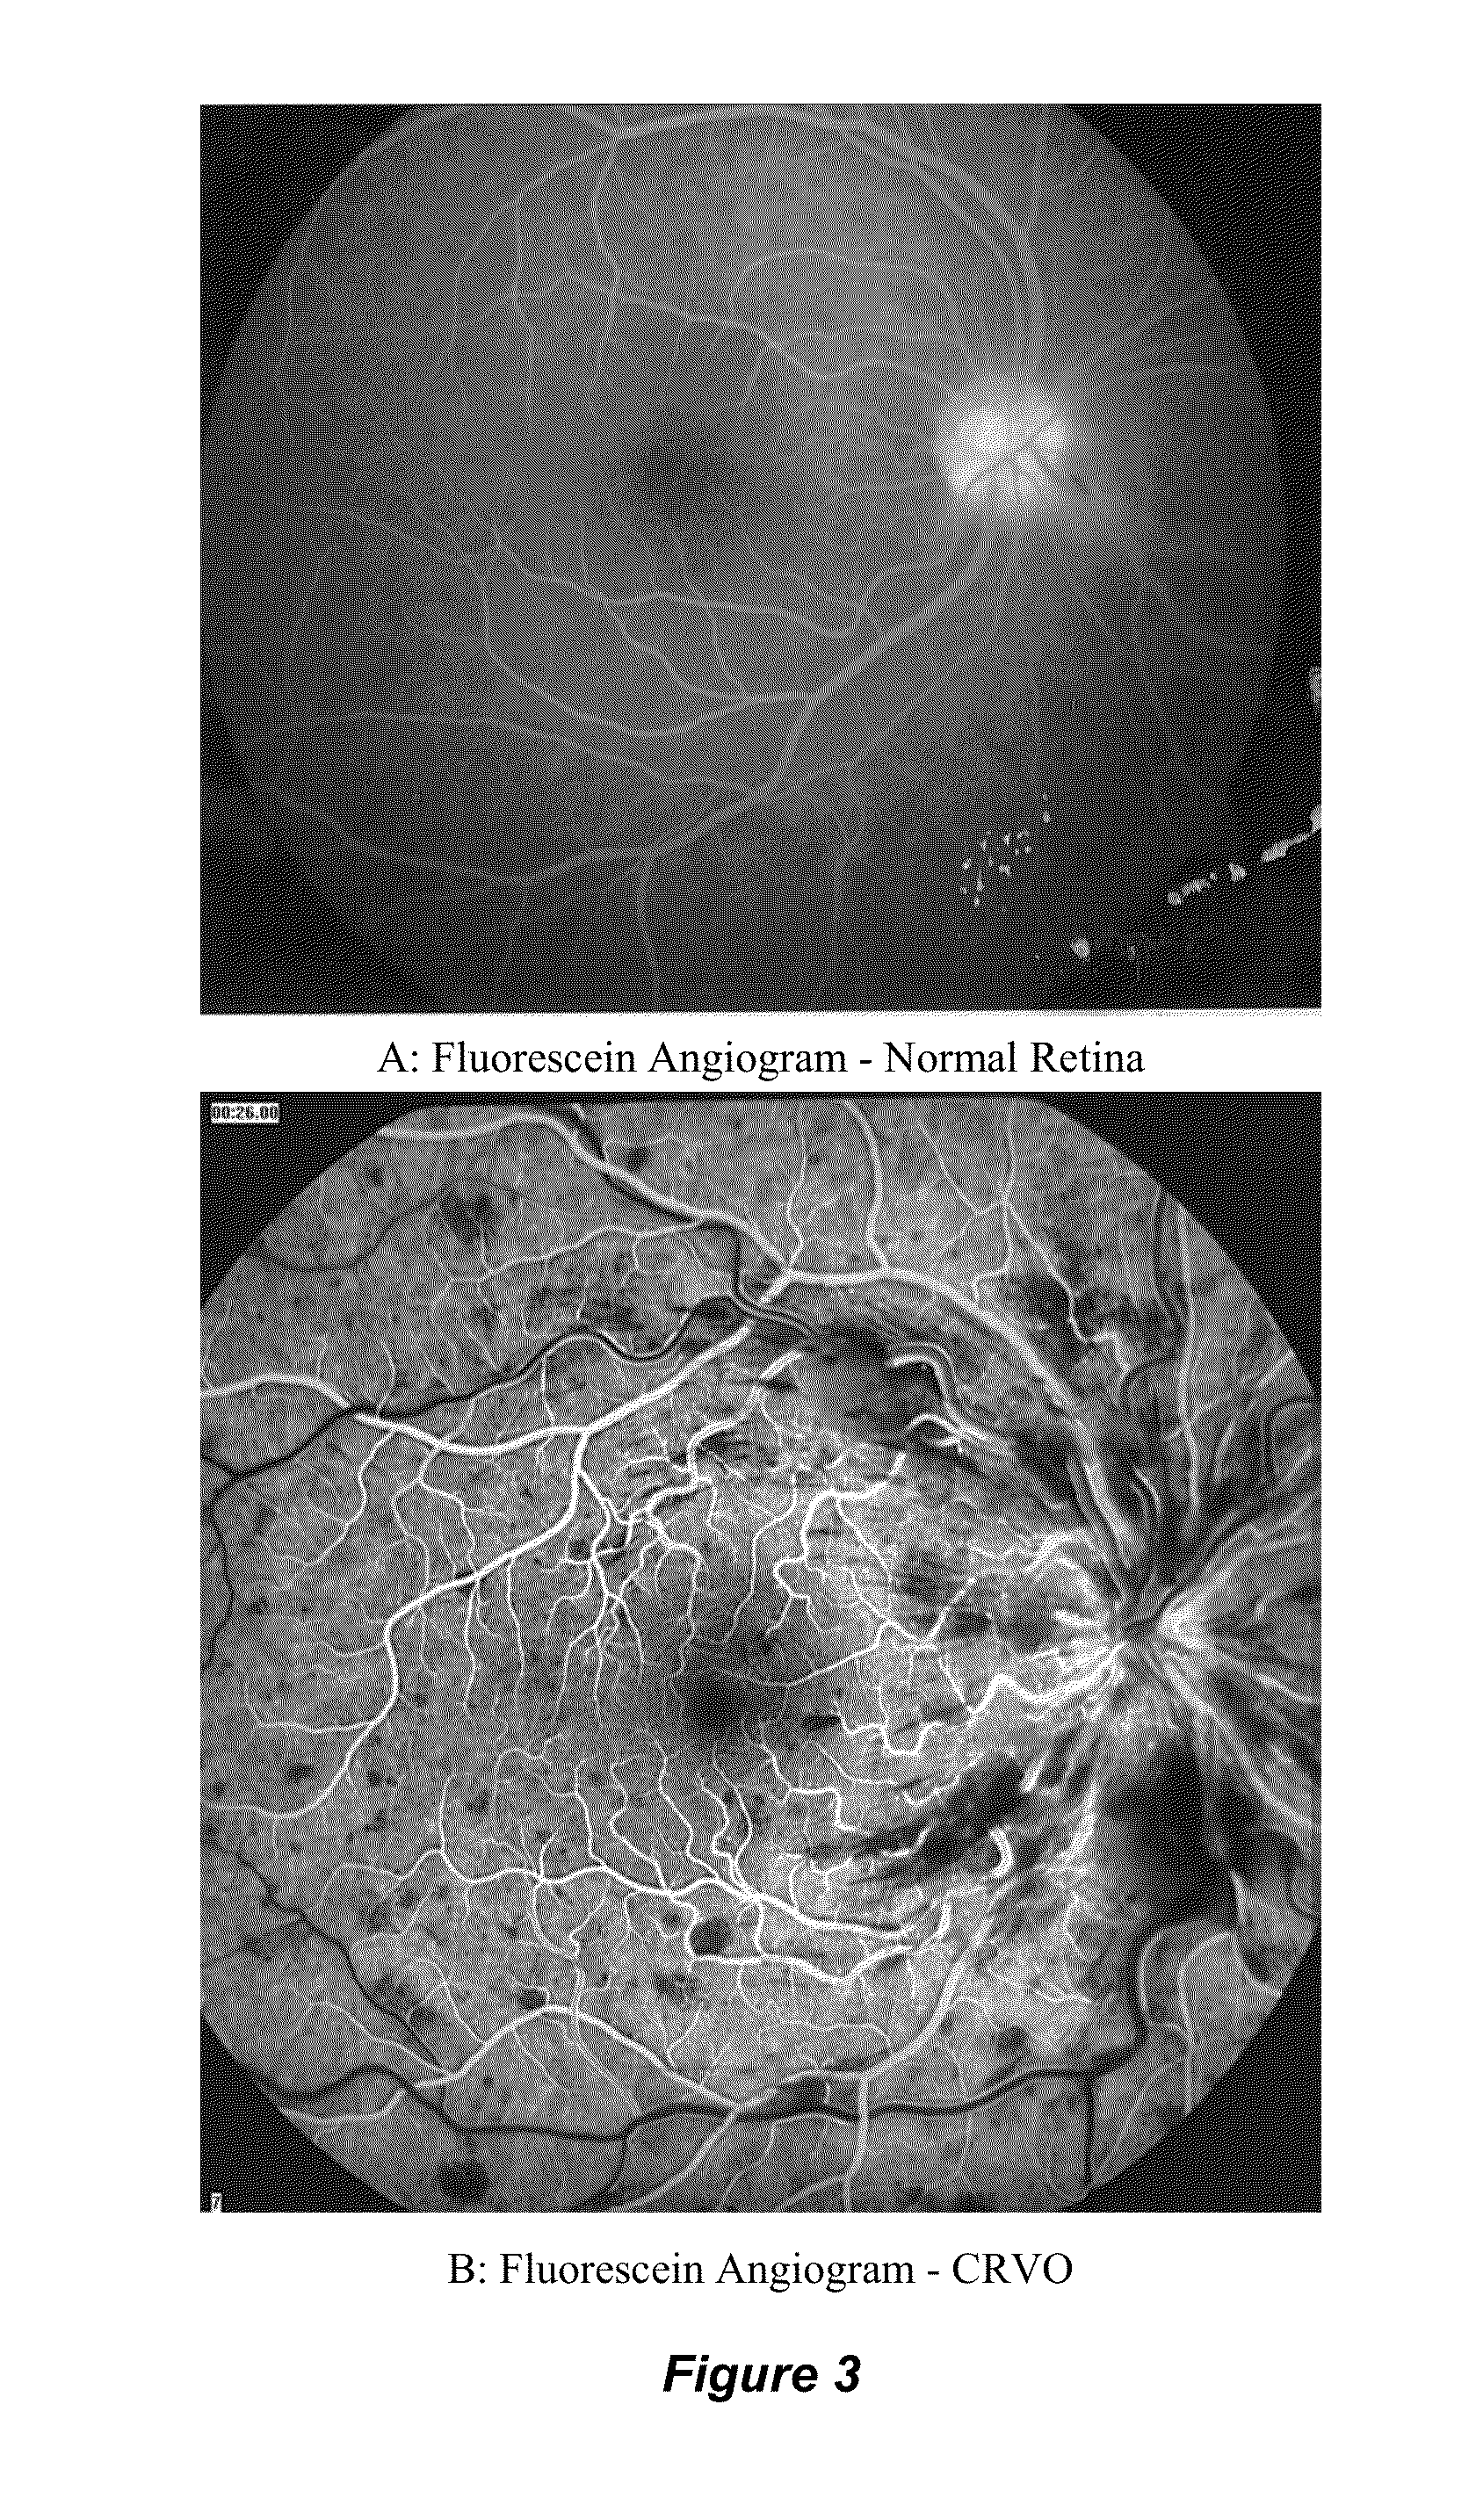 Methods, apparatus, and compounds for the treatment of central retinal vein occlusion and other conditions